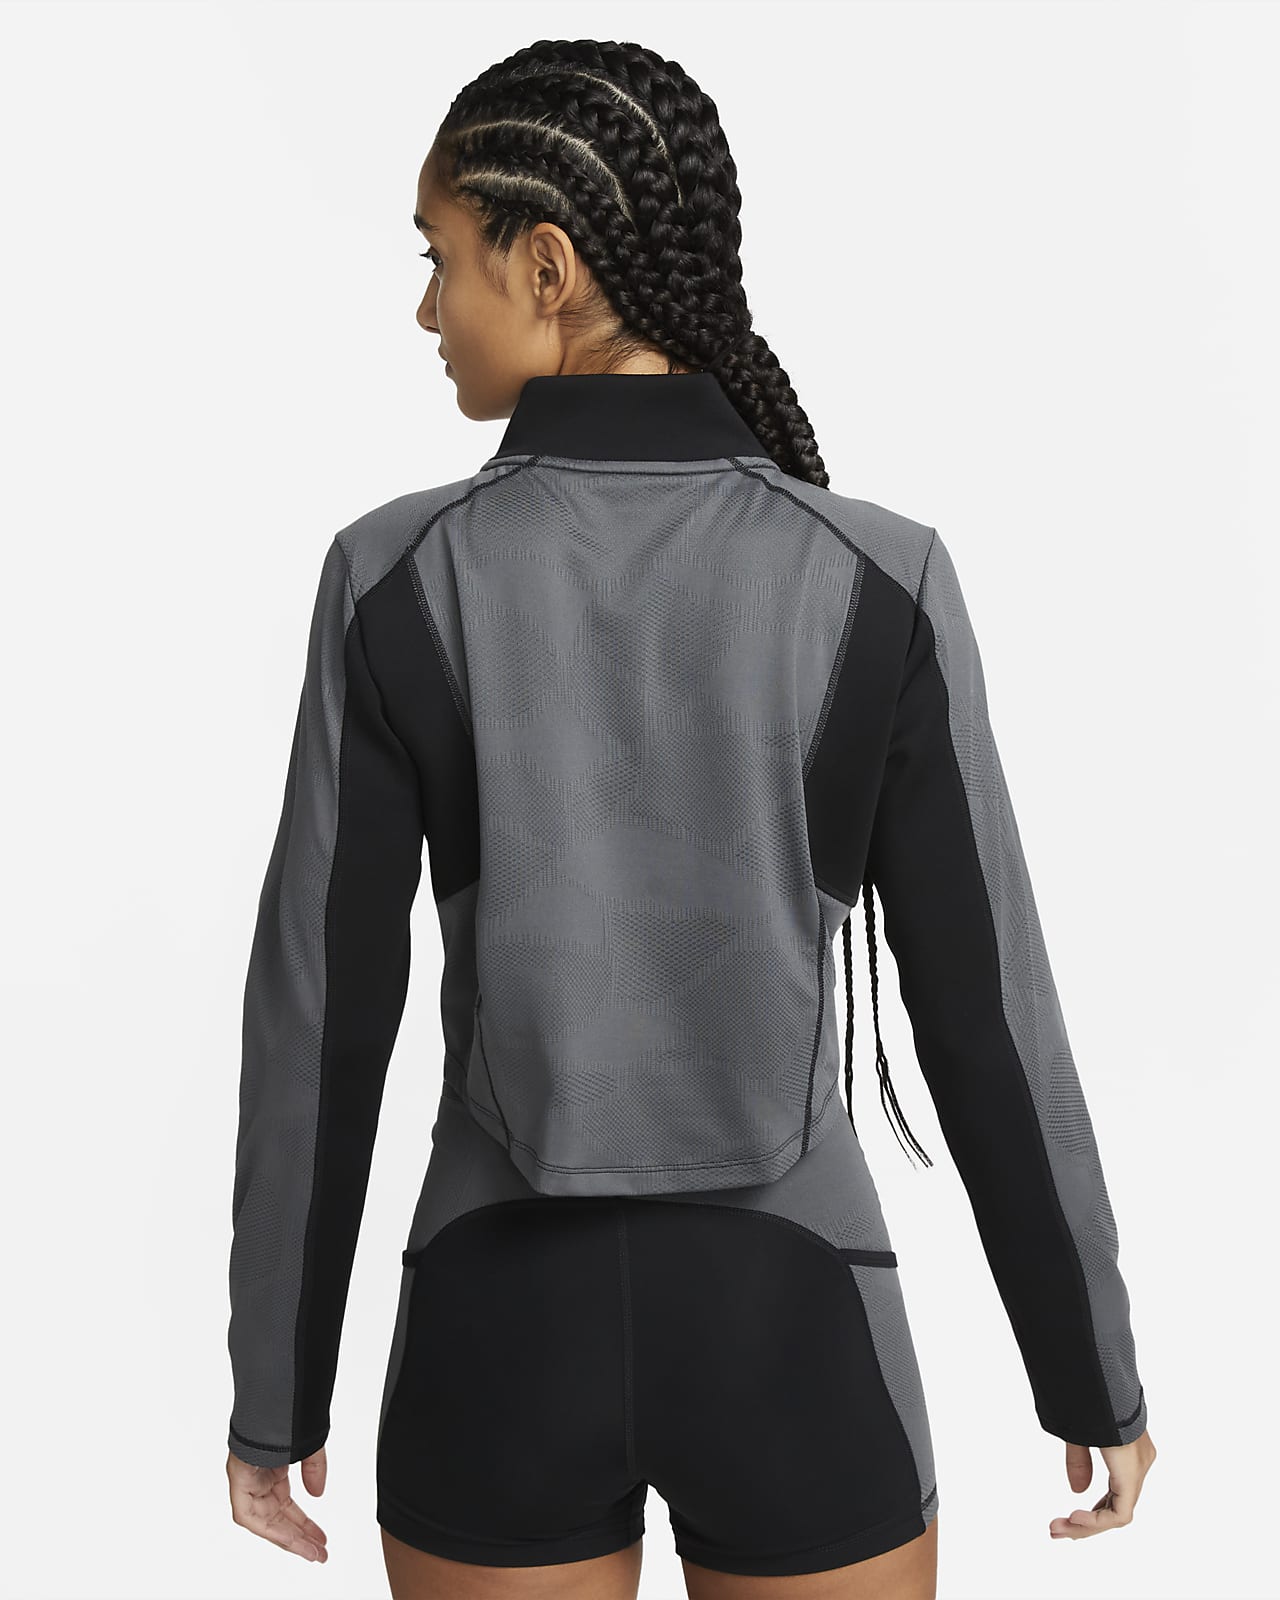 https://static.nike.com/a/images/t_PDP_1280_v1/f_auto,q_auto:eco/f9c10308-c5bb-4caa-b66e-06a9f14192d1/dri-fit-womens-long-sleeve-1-4-zip-training-top-sFnPn9.png